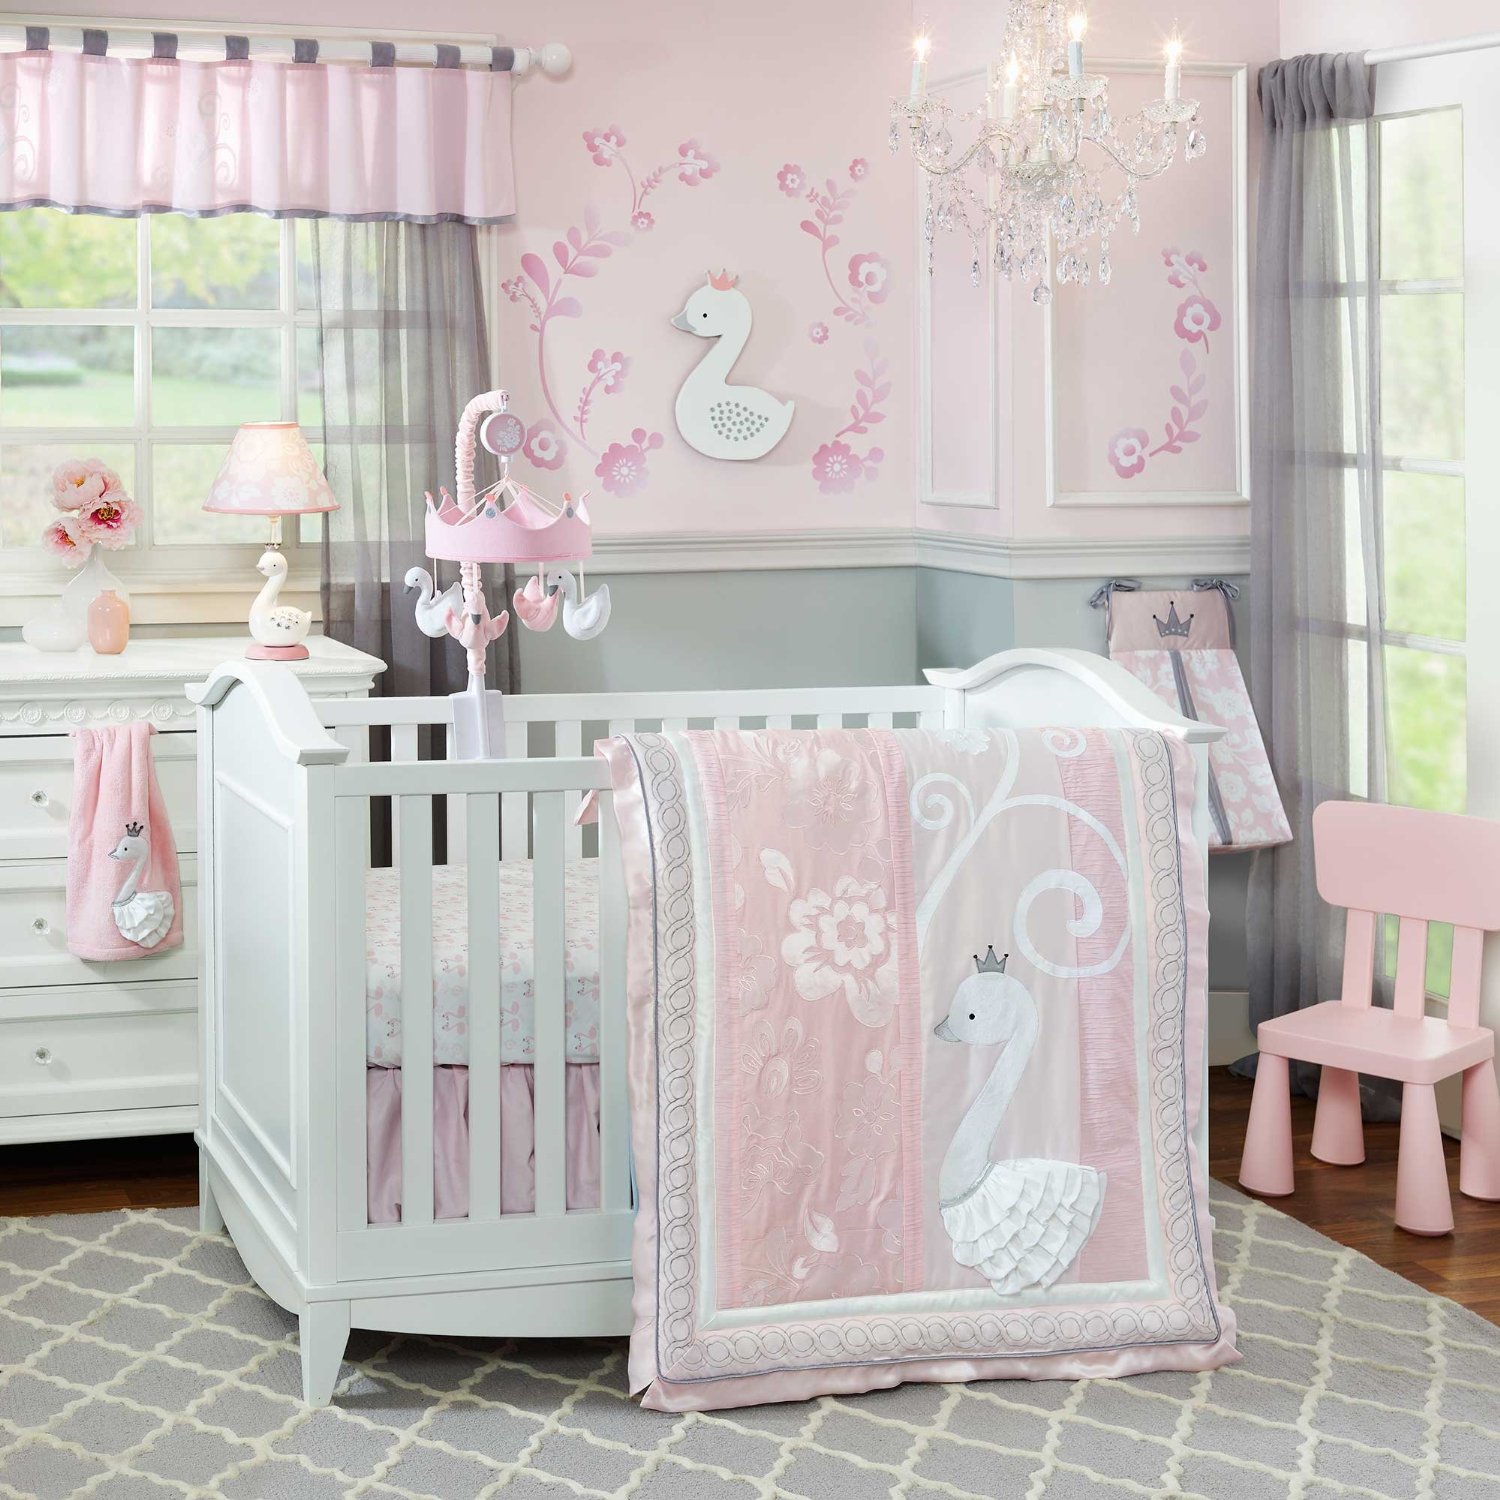 21 Inspiring Ideas for Creating A Unique Crib With Custom Baby Bedding BabyDotDot Baby Guide